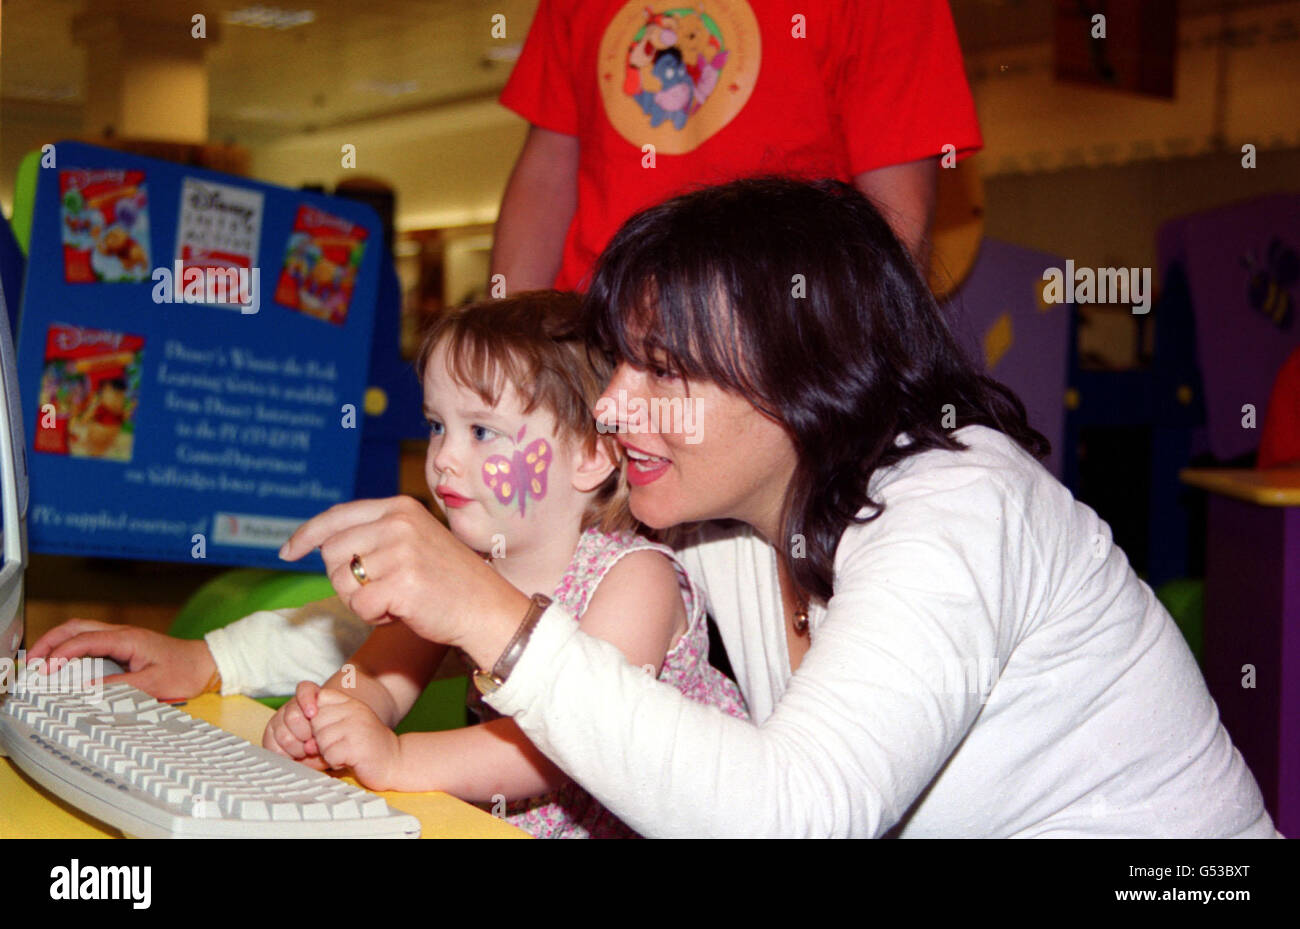 Comedienne and author Arabella Weir and her two year old daughter Isabella, appearing at the 'Winnie the Pooh Friendship Celebration', at Selfridges department store on Oxford Street, in London. Stock Photo